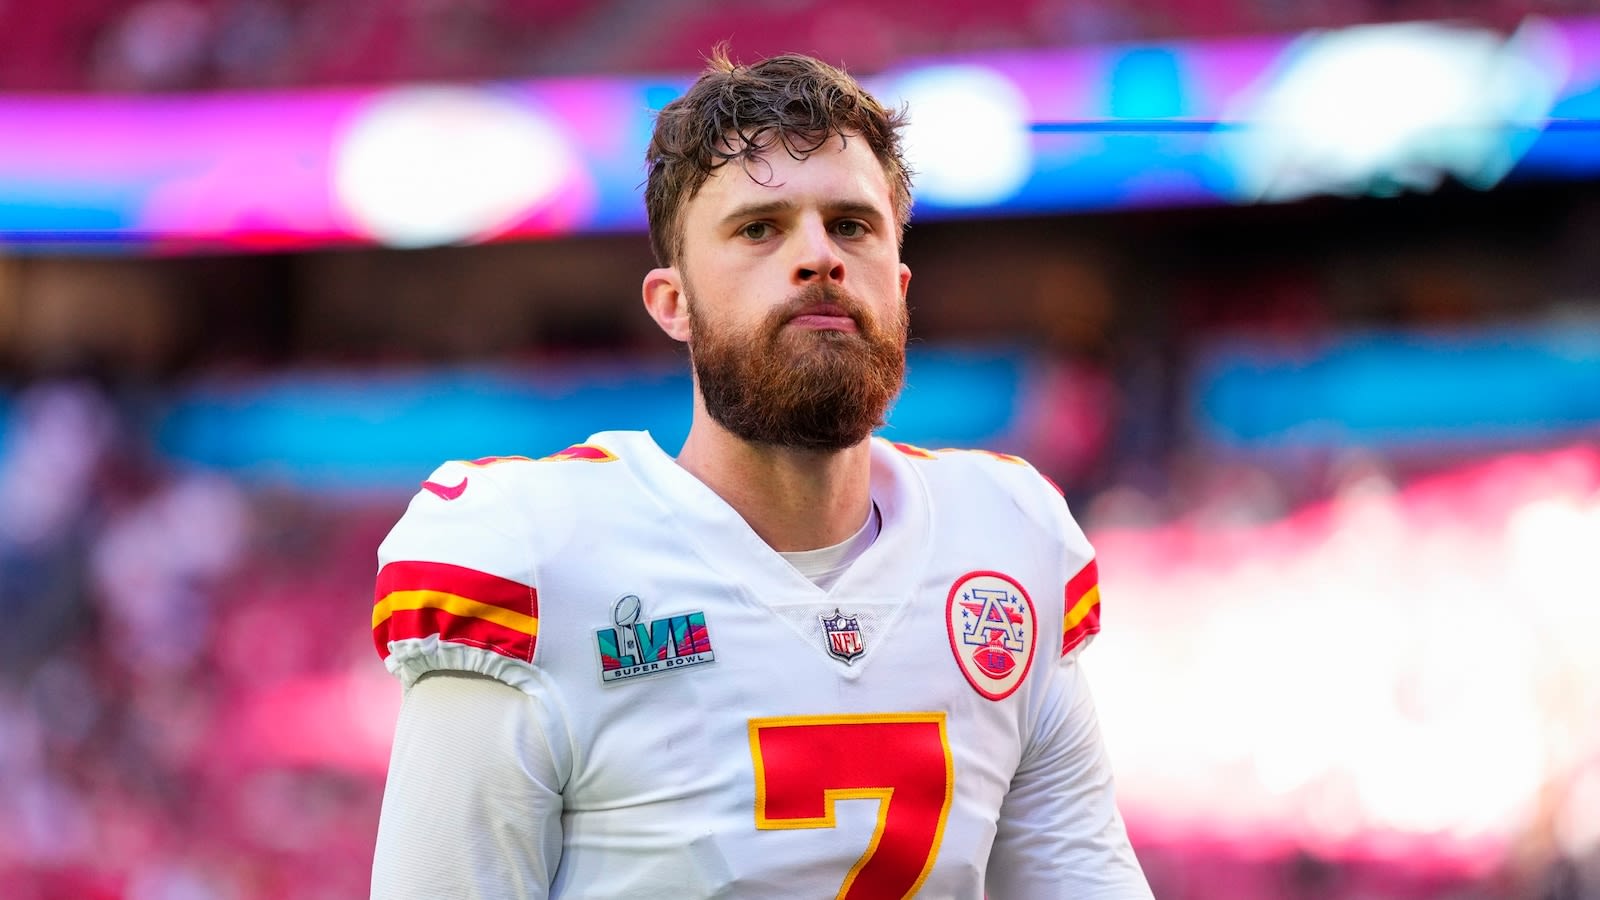 Kansas City Chiefs player faces backlash for graduation speech criticizing working women, calling Pride a 'deadly sin'